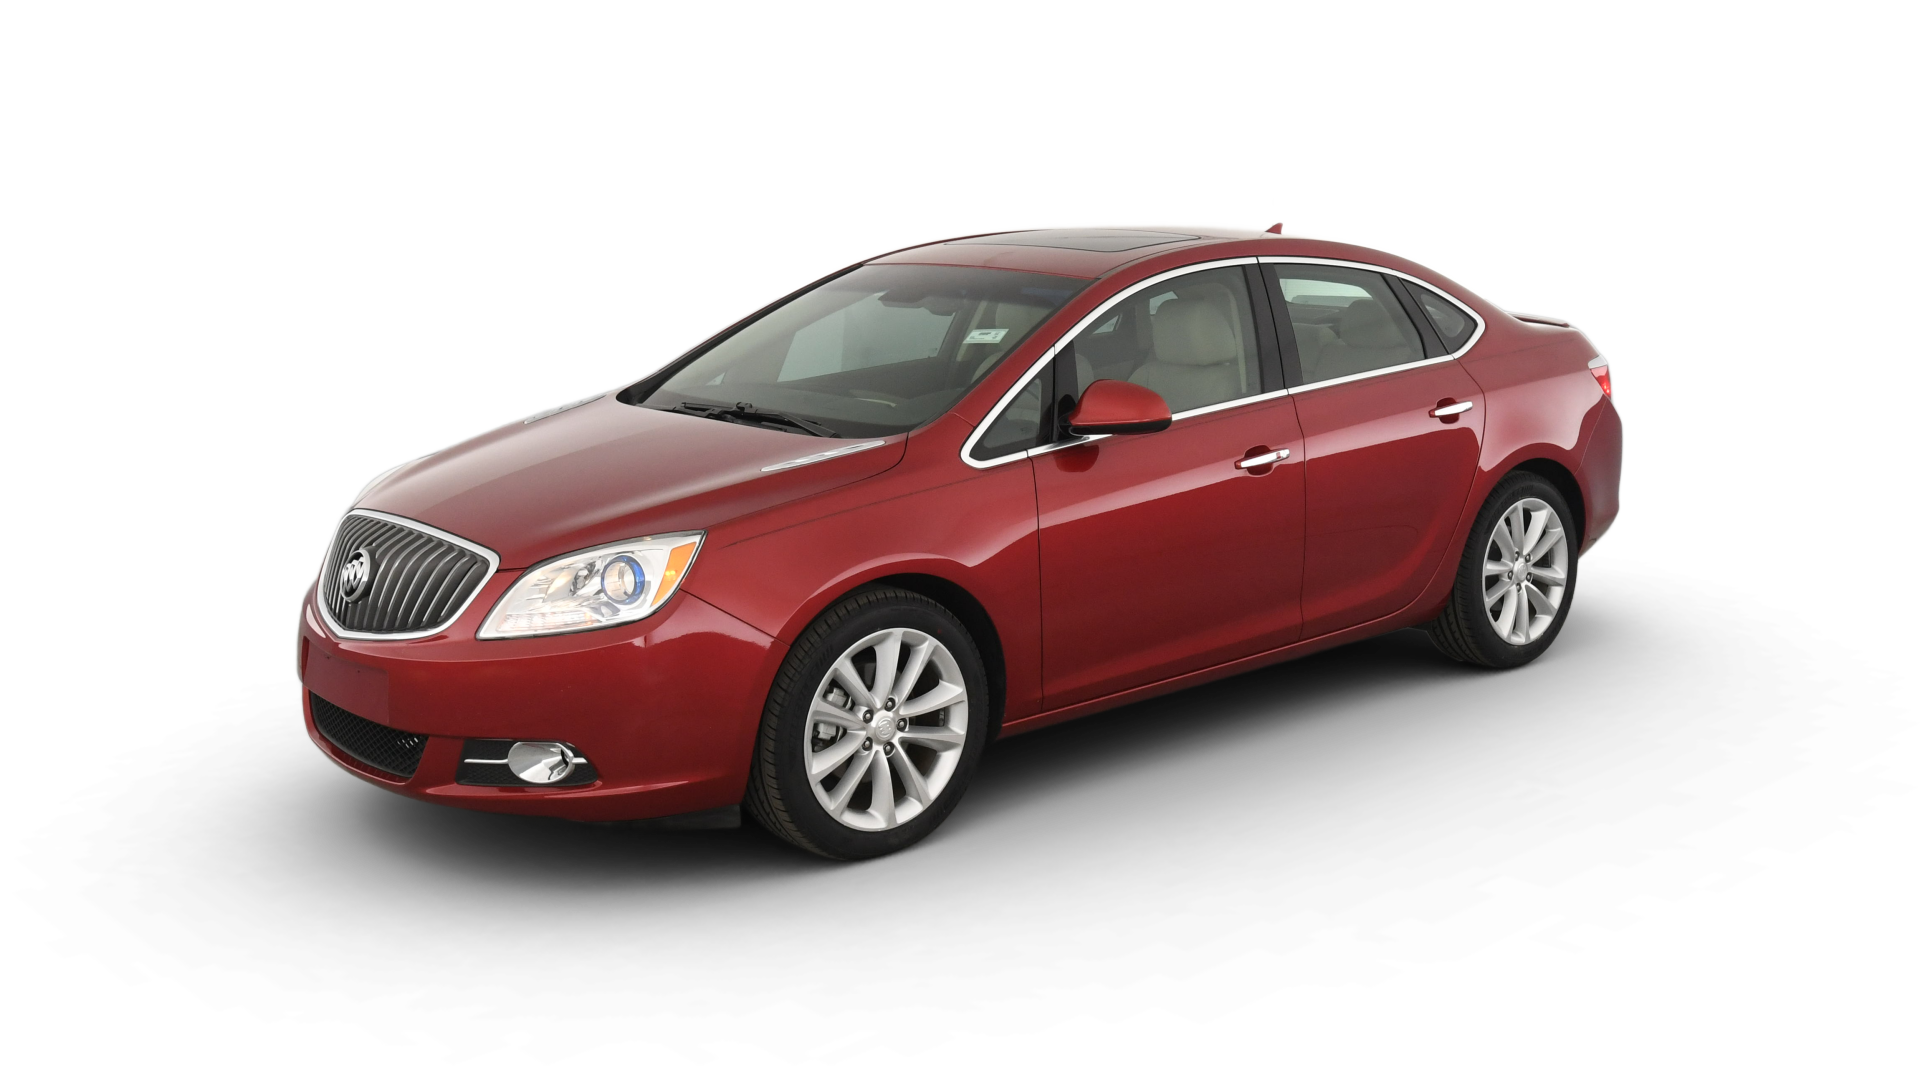 Used Buick Verano For Sale Online | Carvana